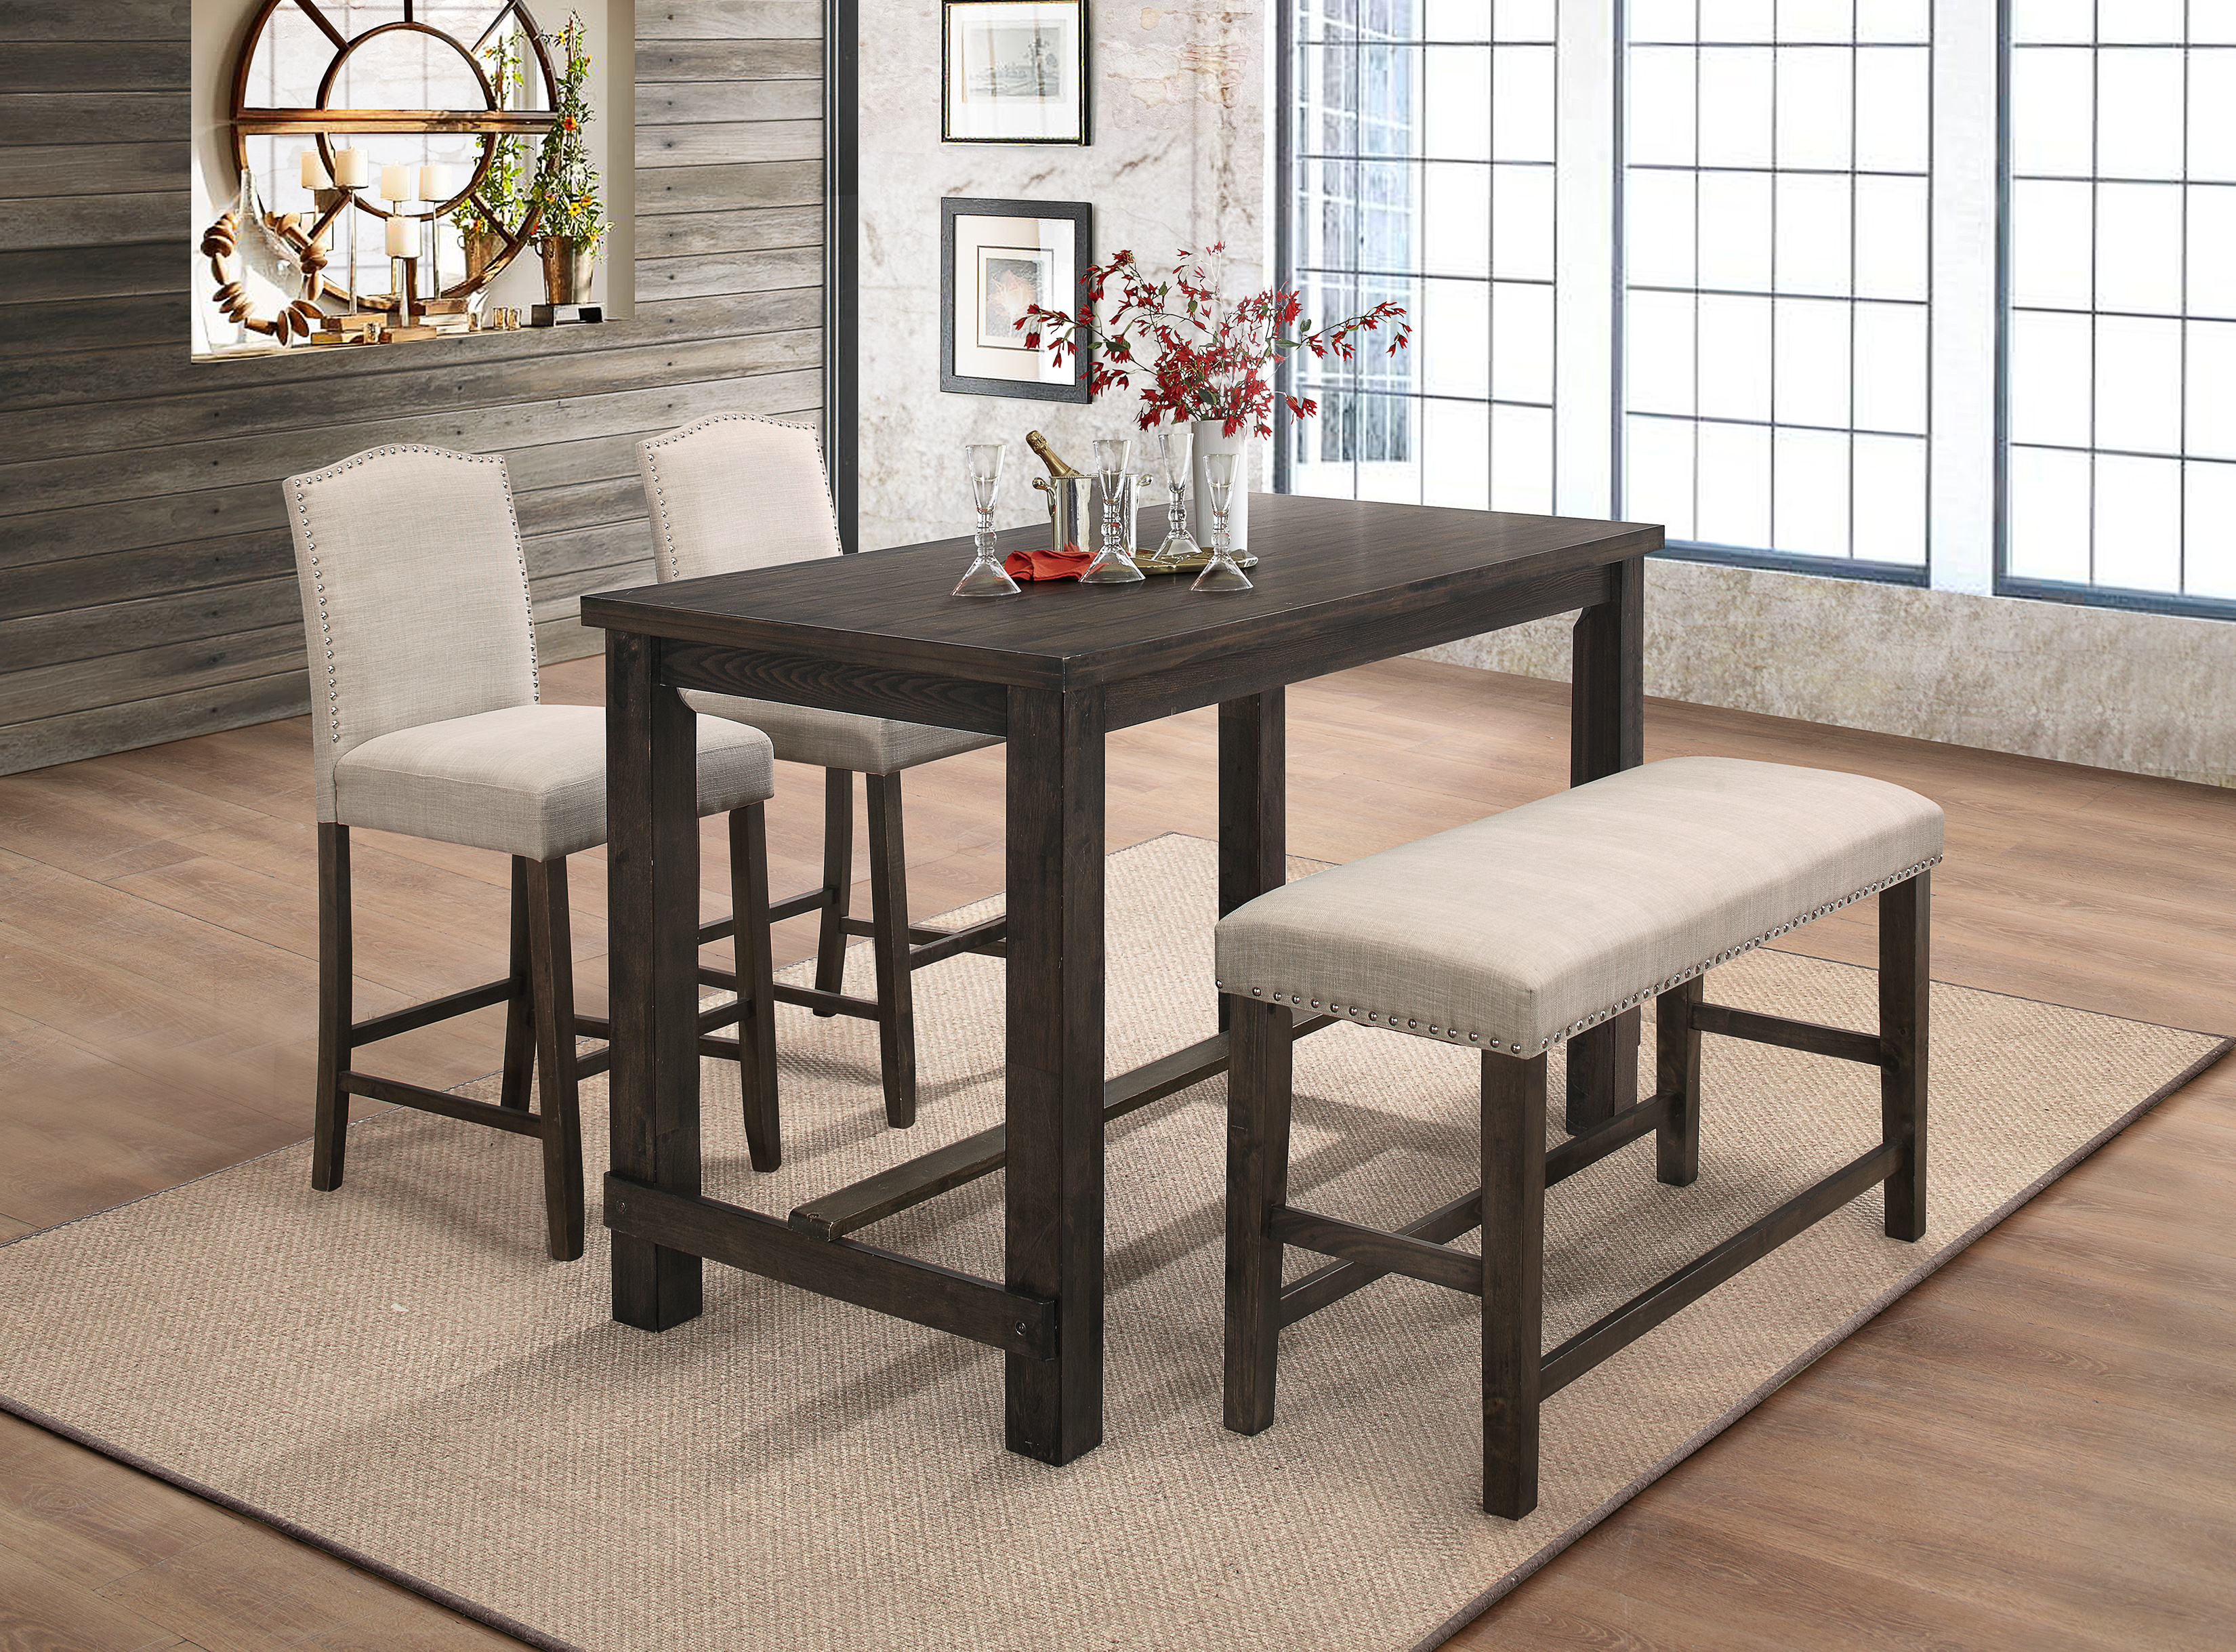 MISHKA 4PC DINING SET: Lease to Own and Financing Leases in Canada 